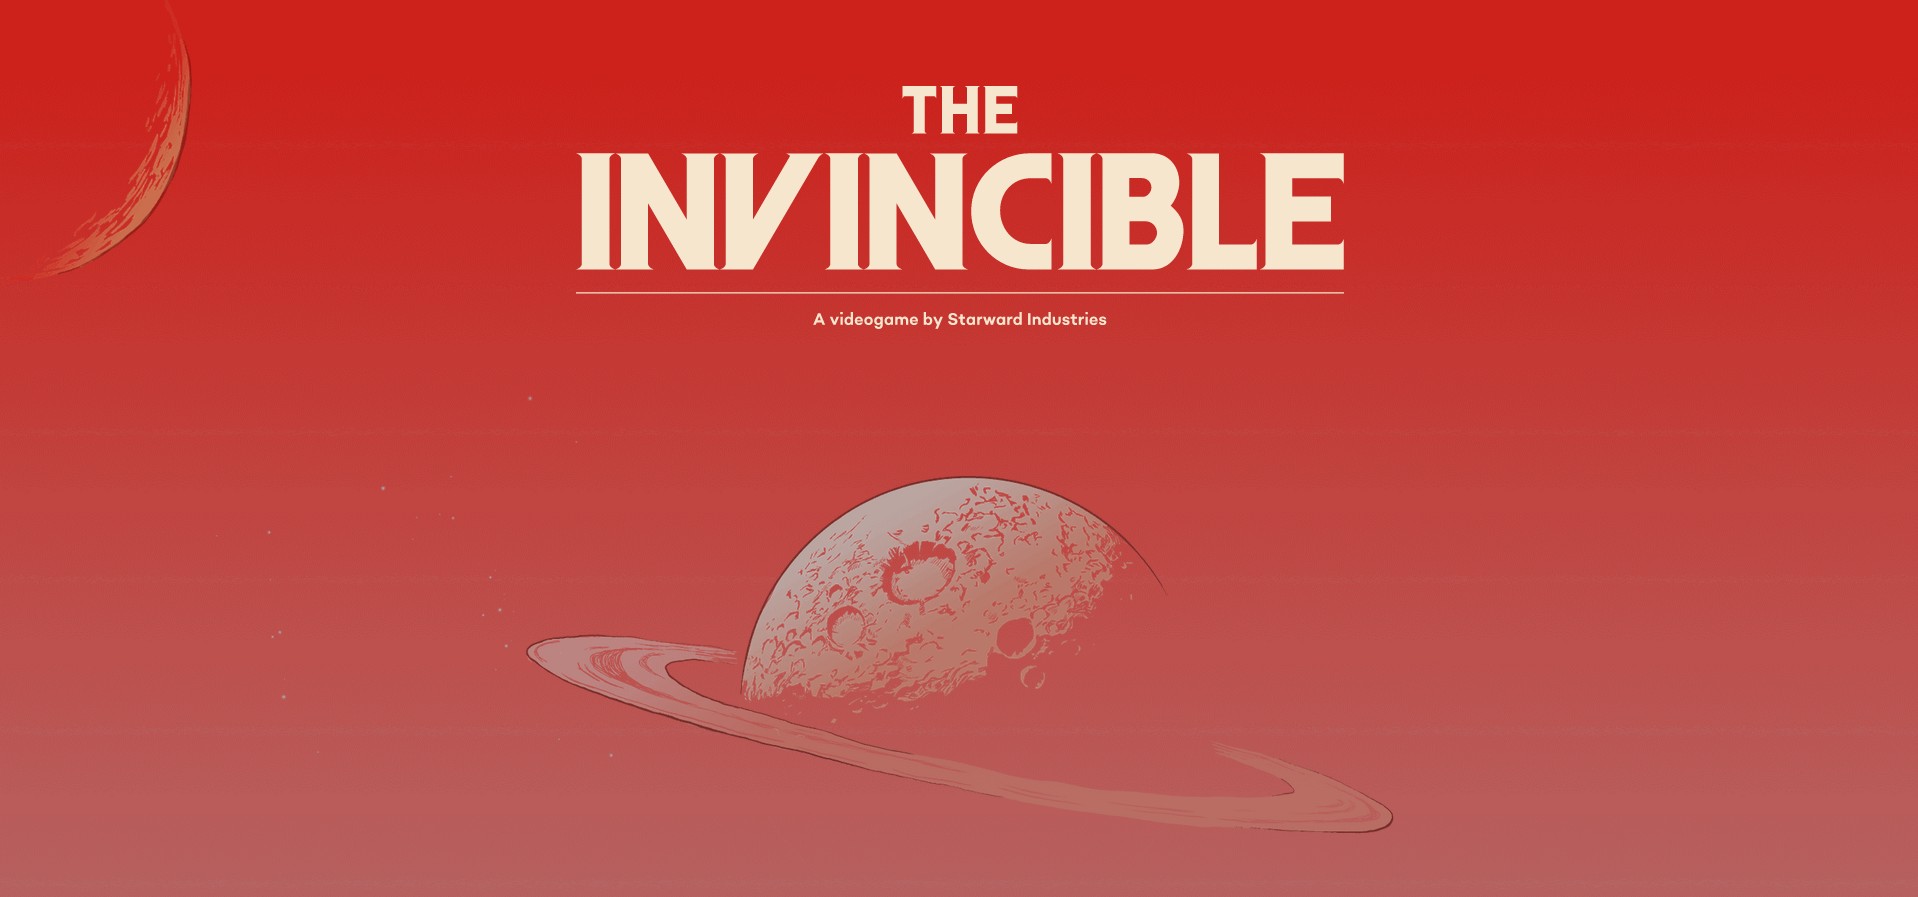 The invincible - a videogame by Starward Industries